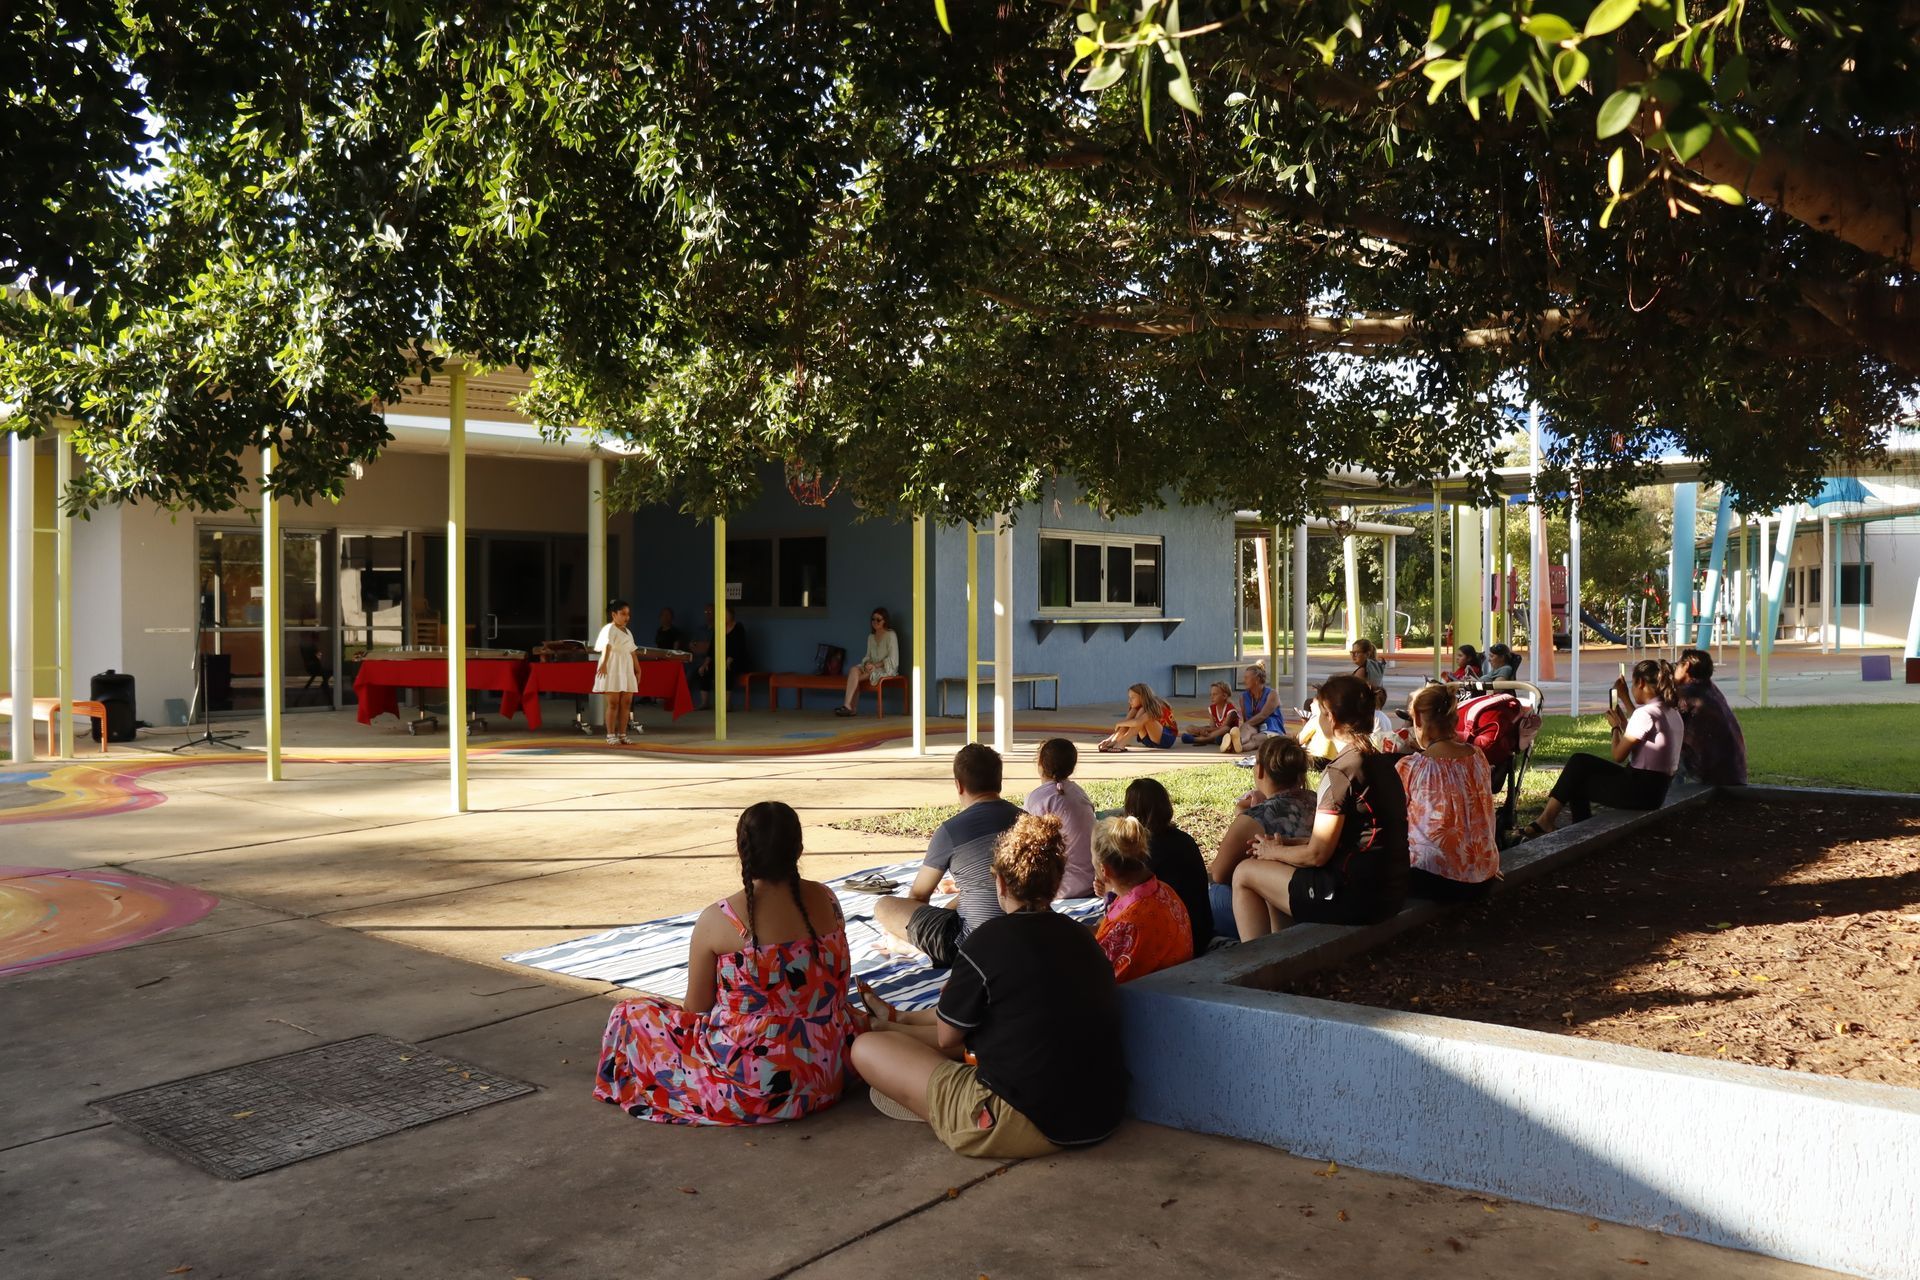 A group of people are sitting under a tree in front of a building.